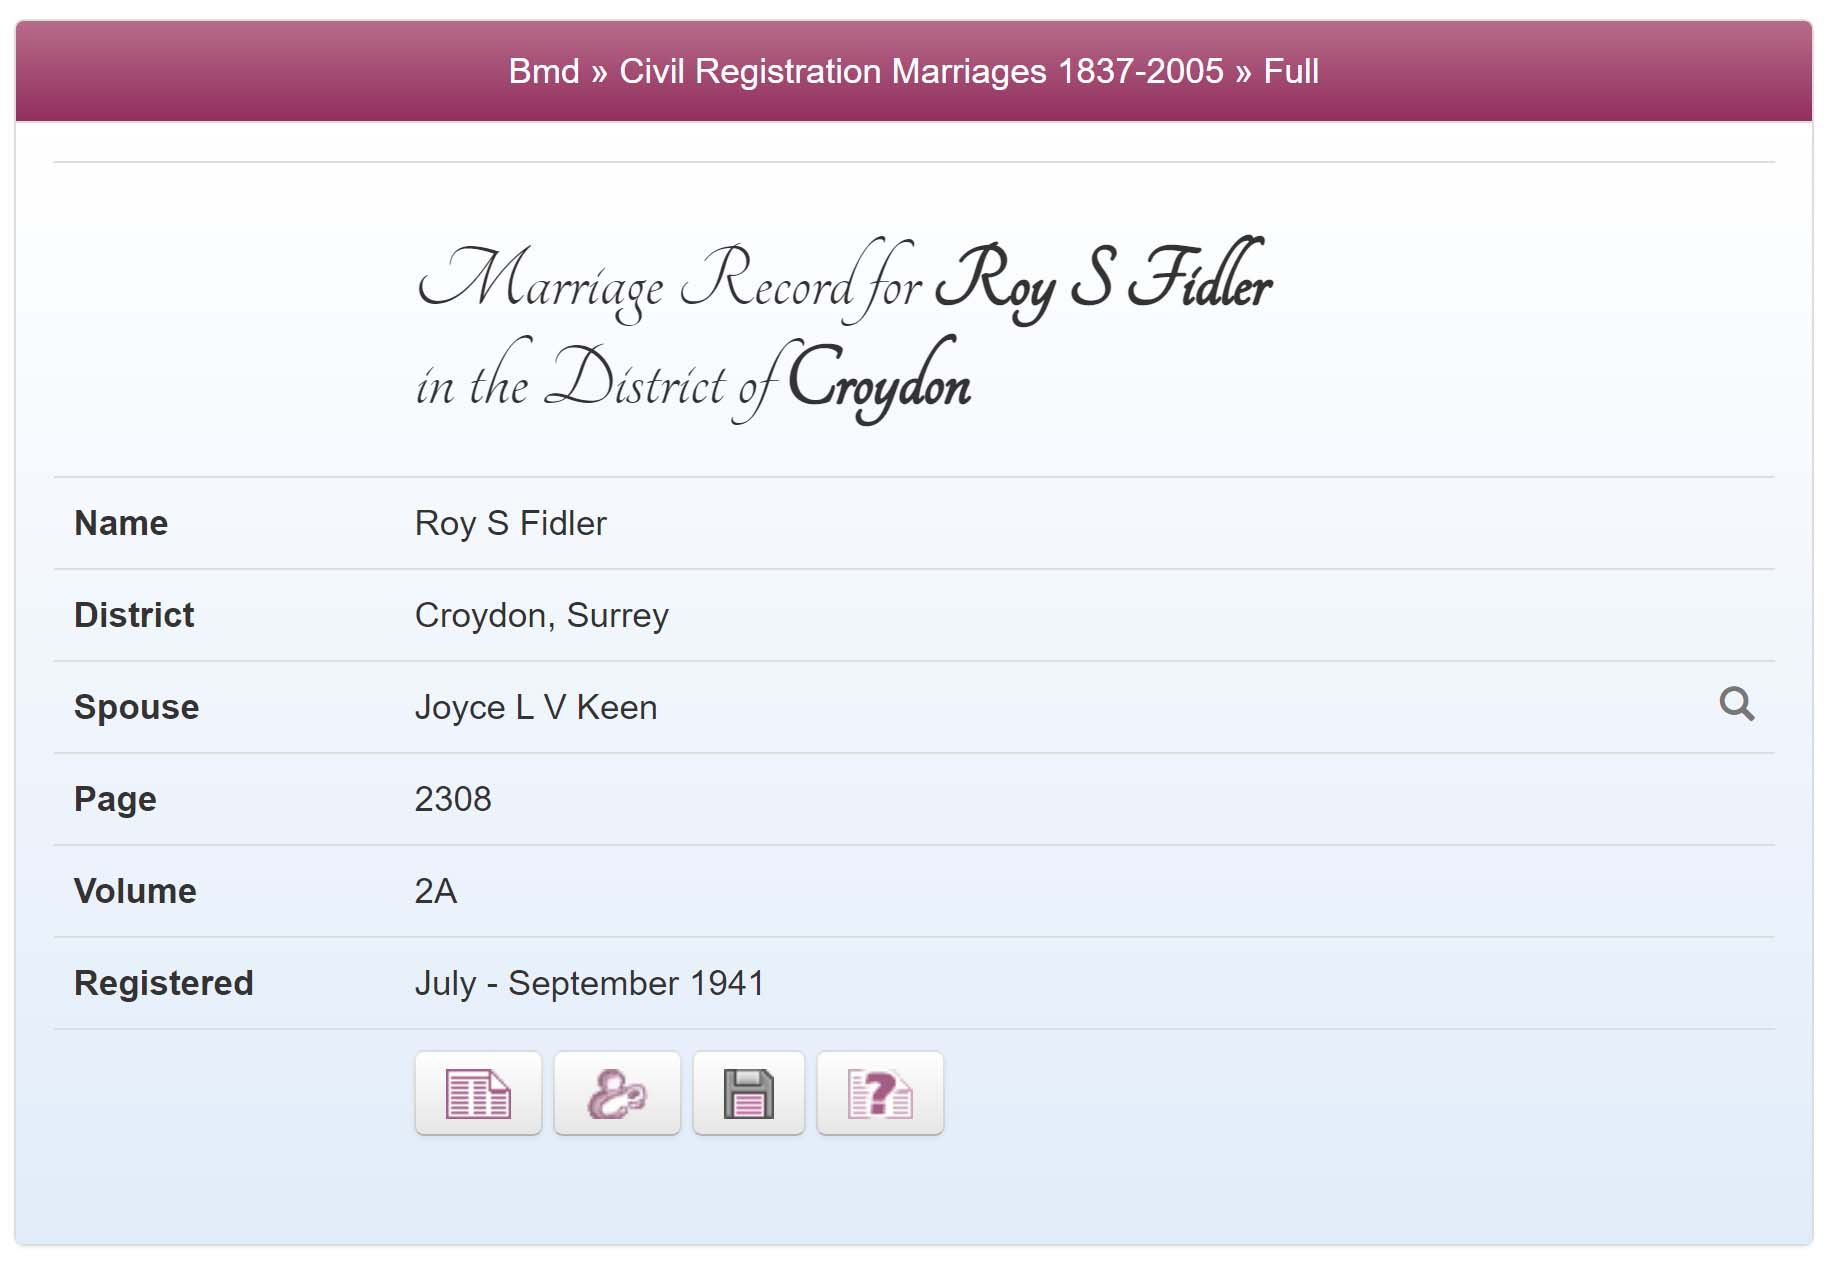 The Marriage for Roy and Joyce Fidler